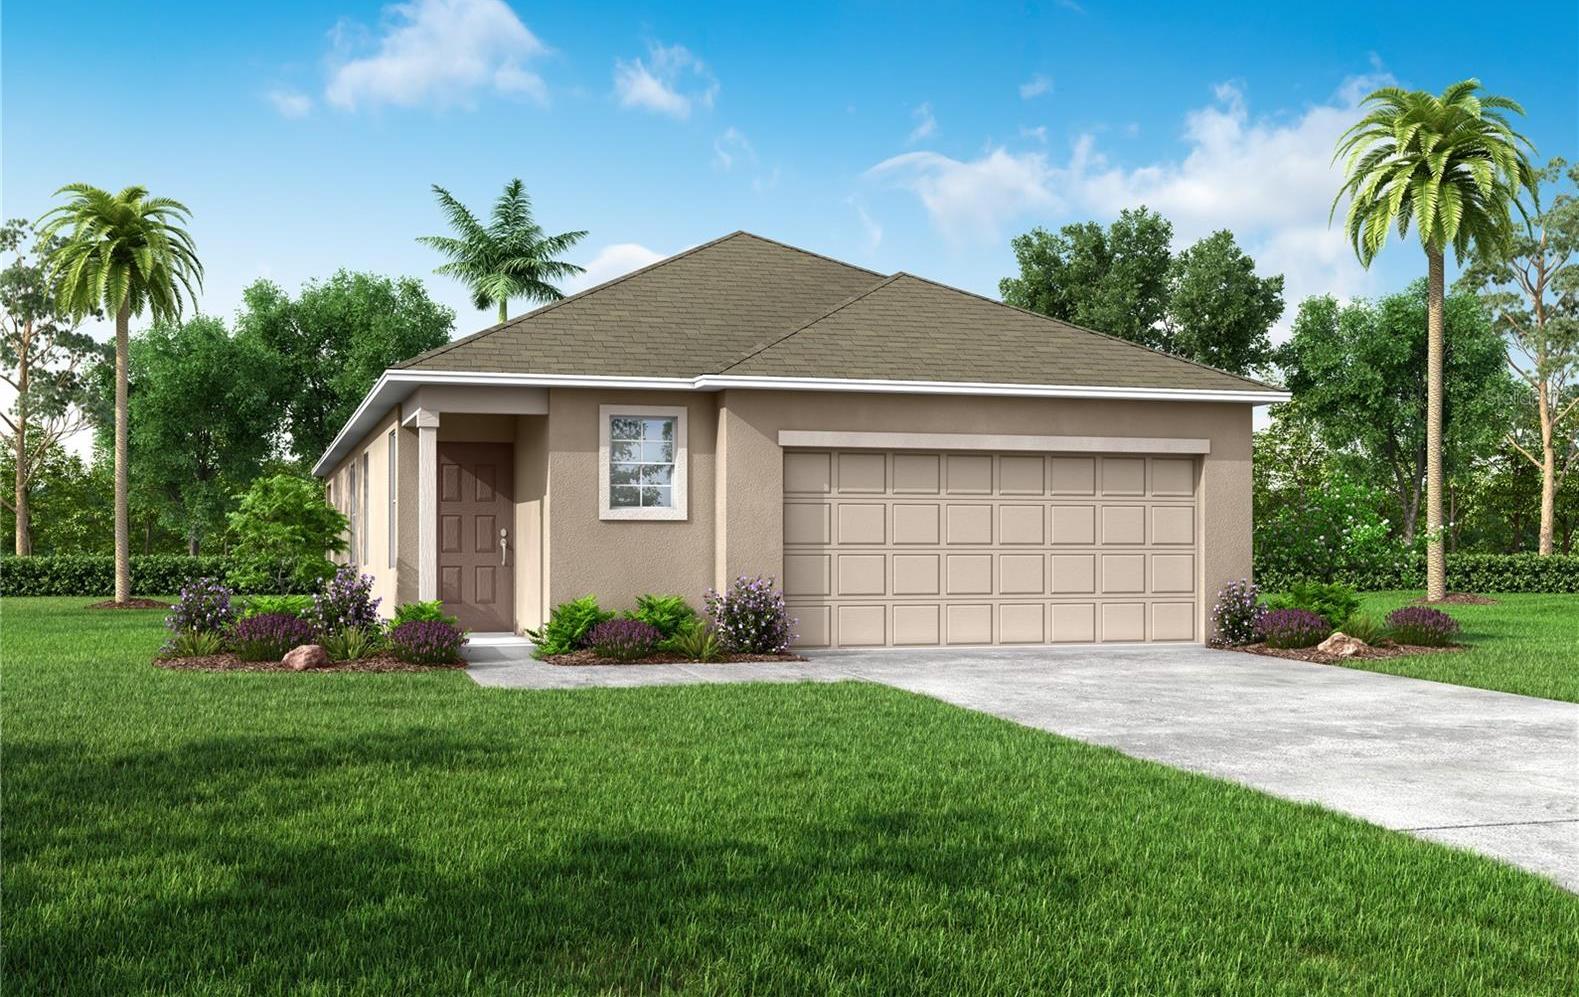 Photo one of 2735 San Marco Way Winter Haven FL 33884 | MLS O6191760